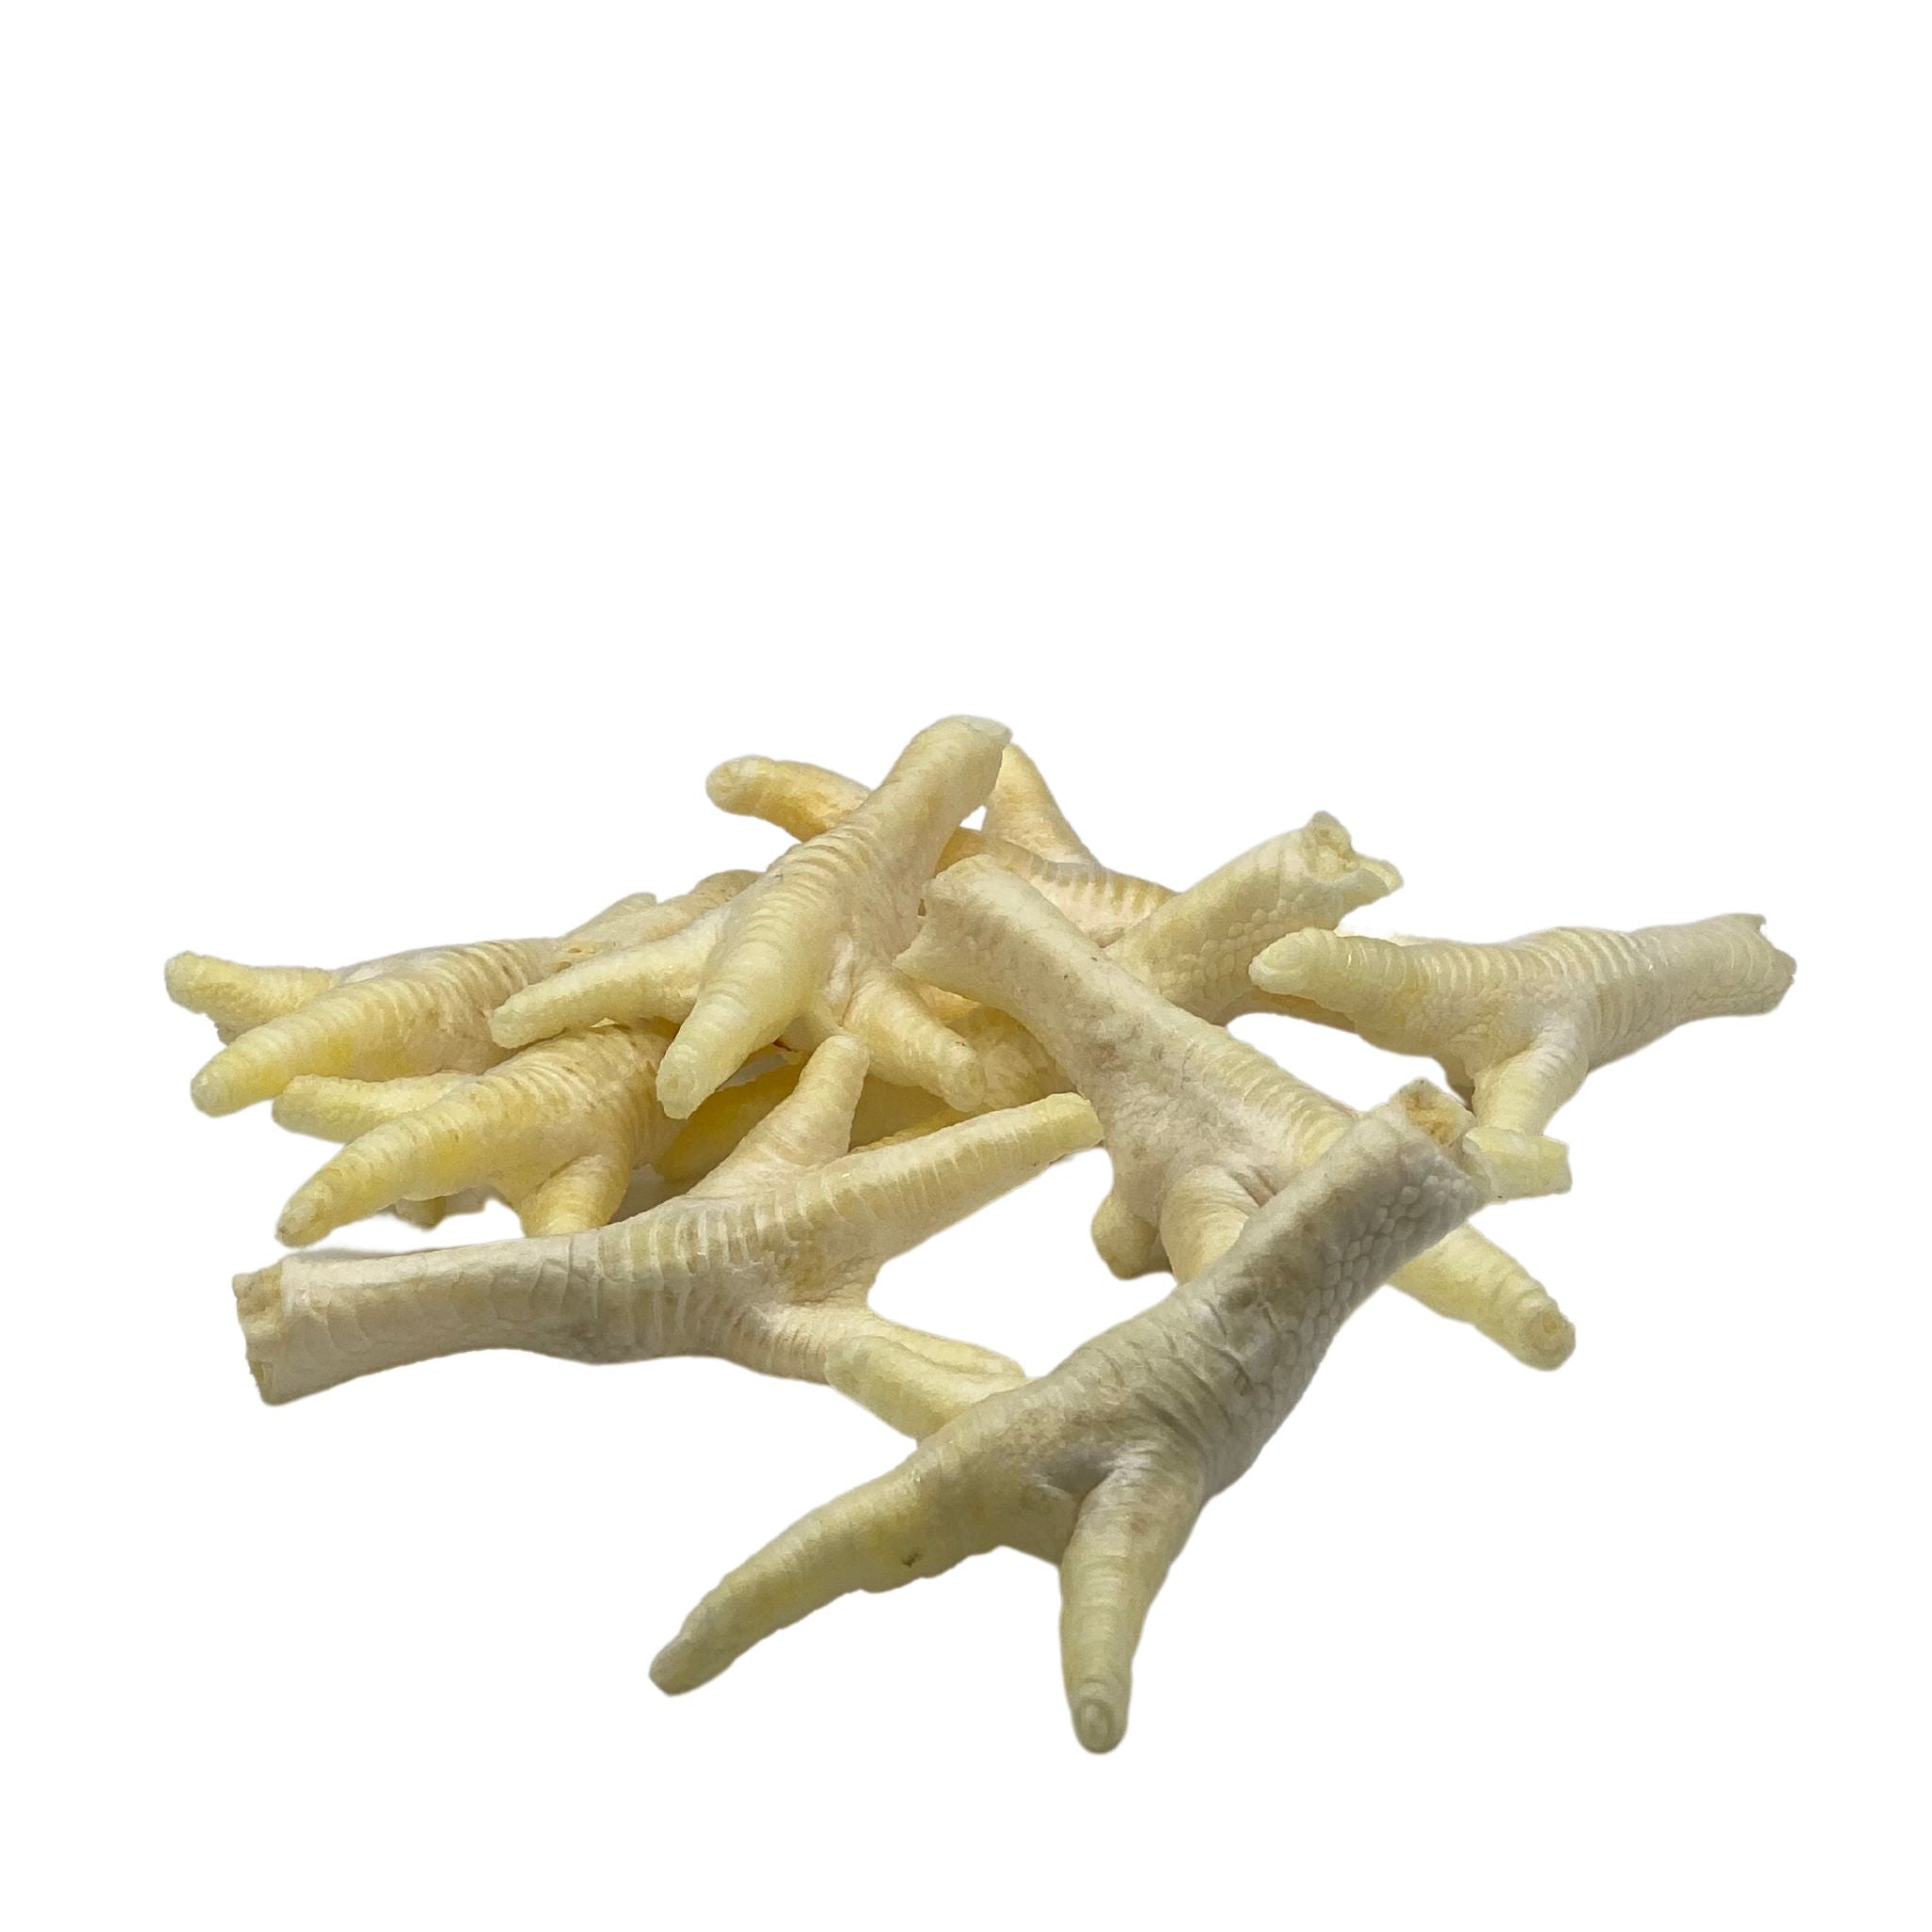 are puffed chicken feet good for dogs